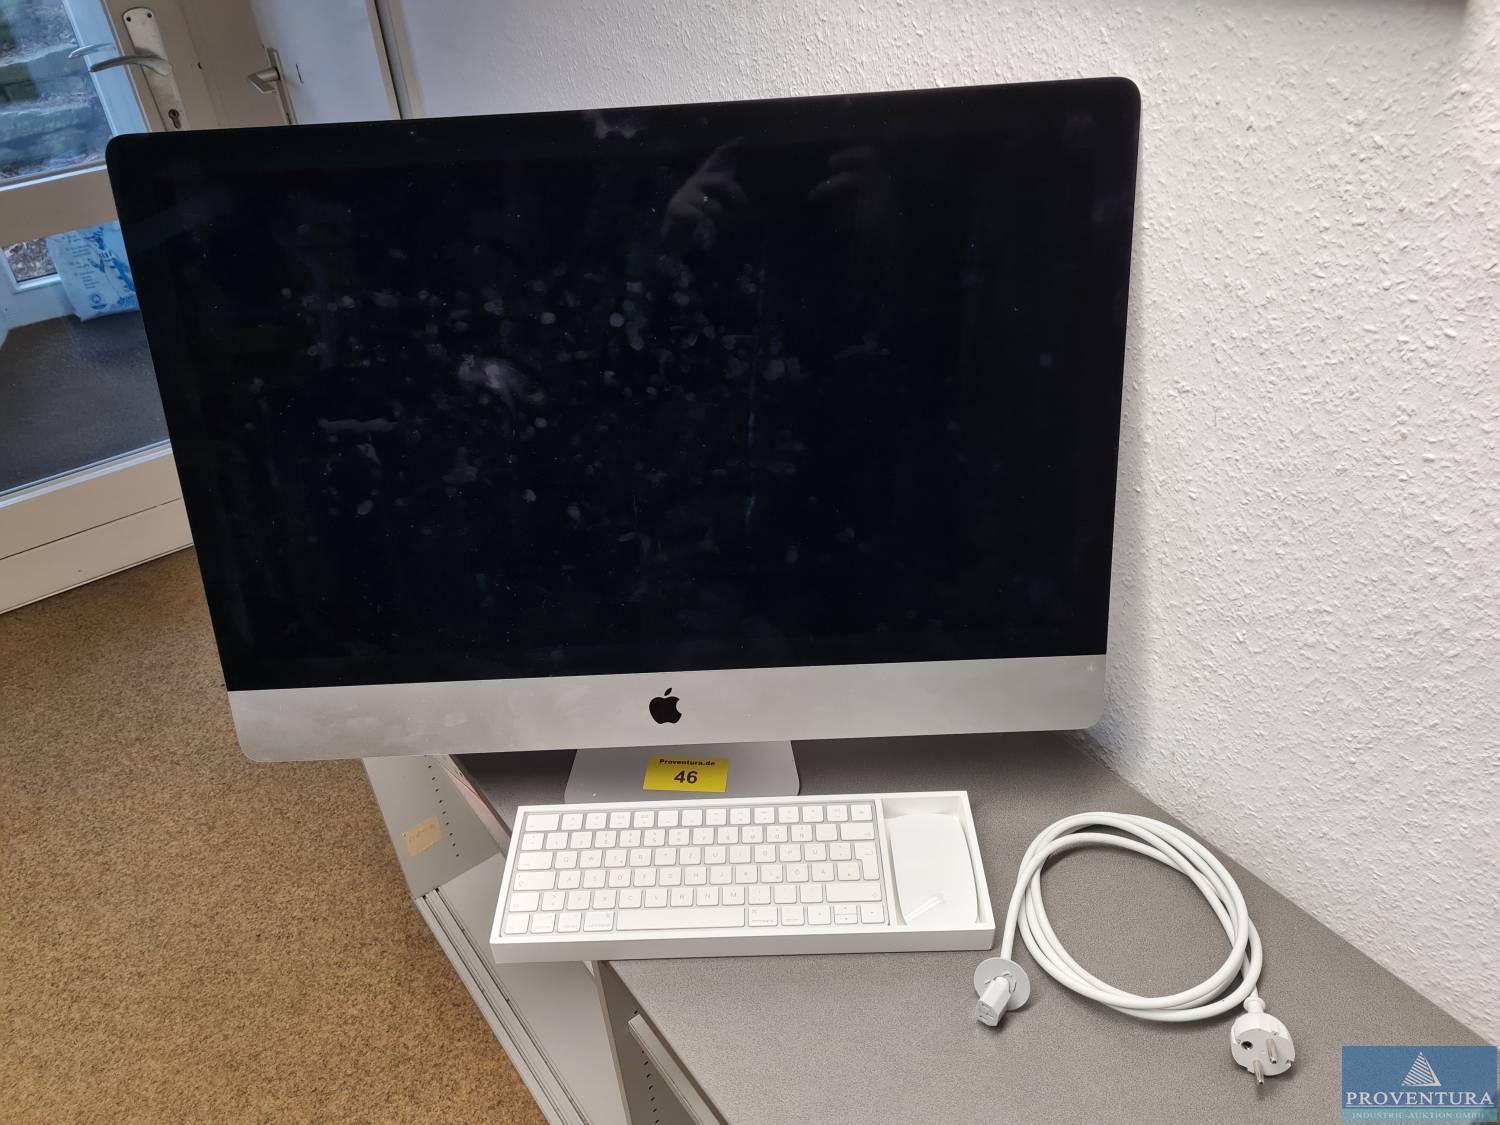 aus Insolvenz: All-in-One-PC APPLE iMac 5K 27